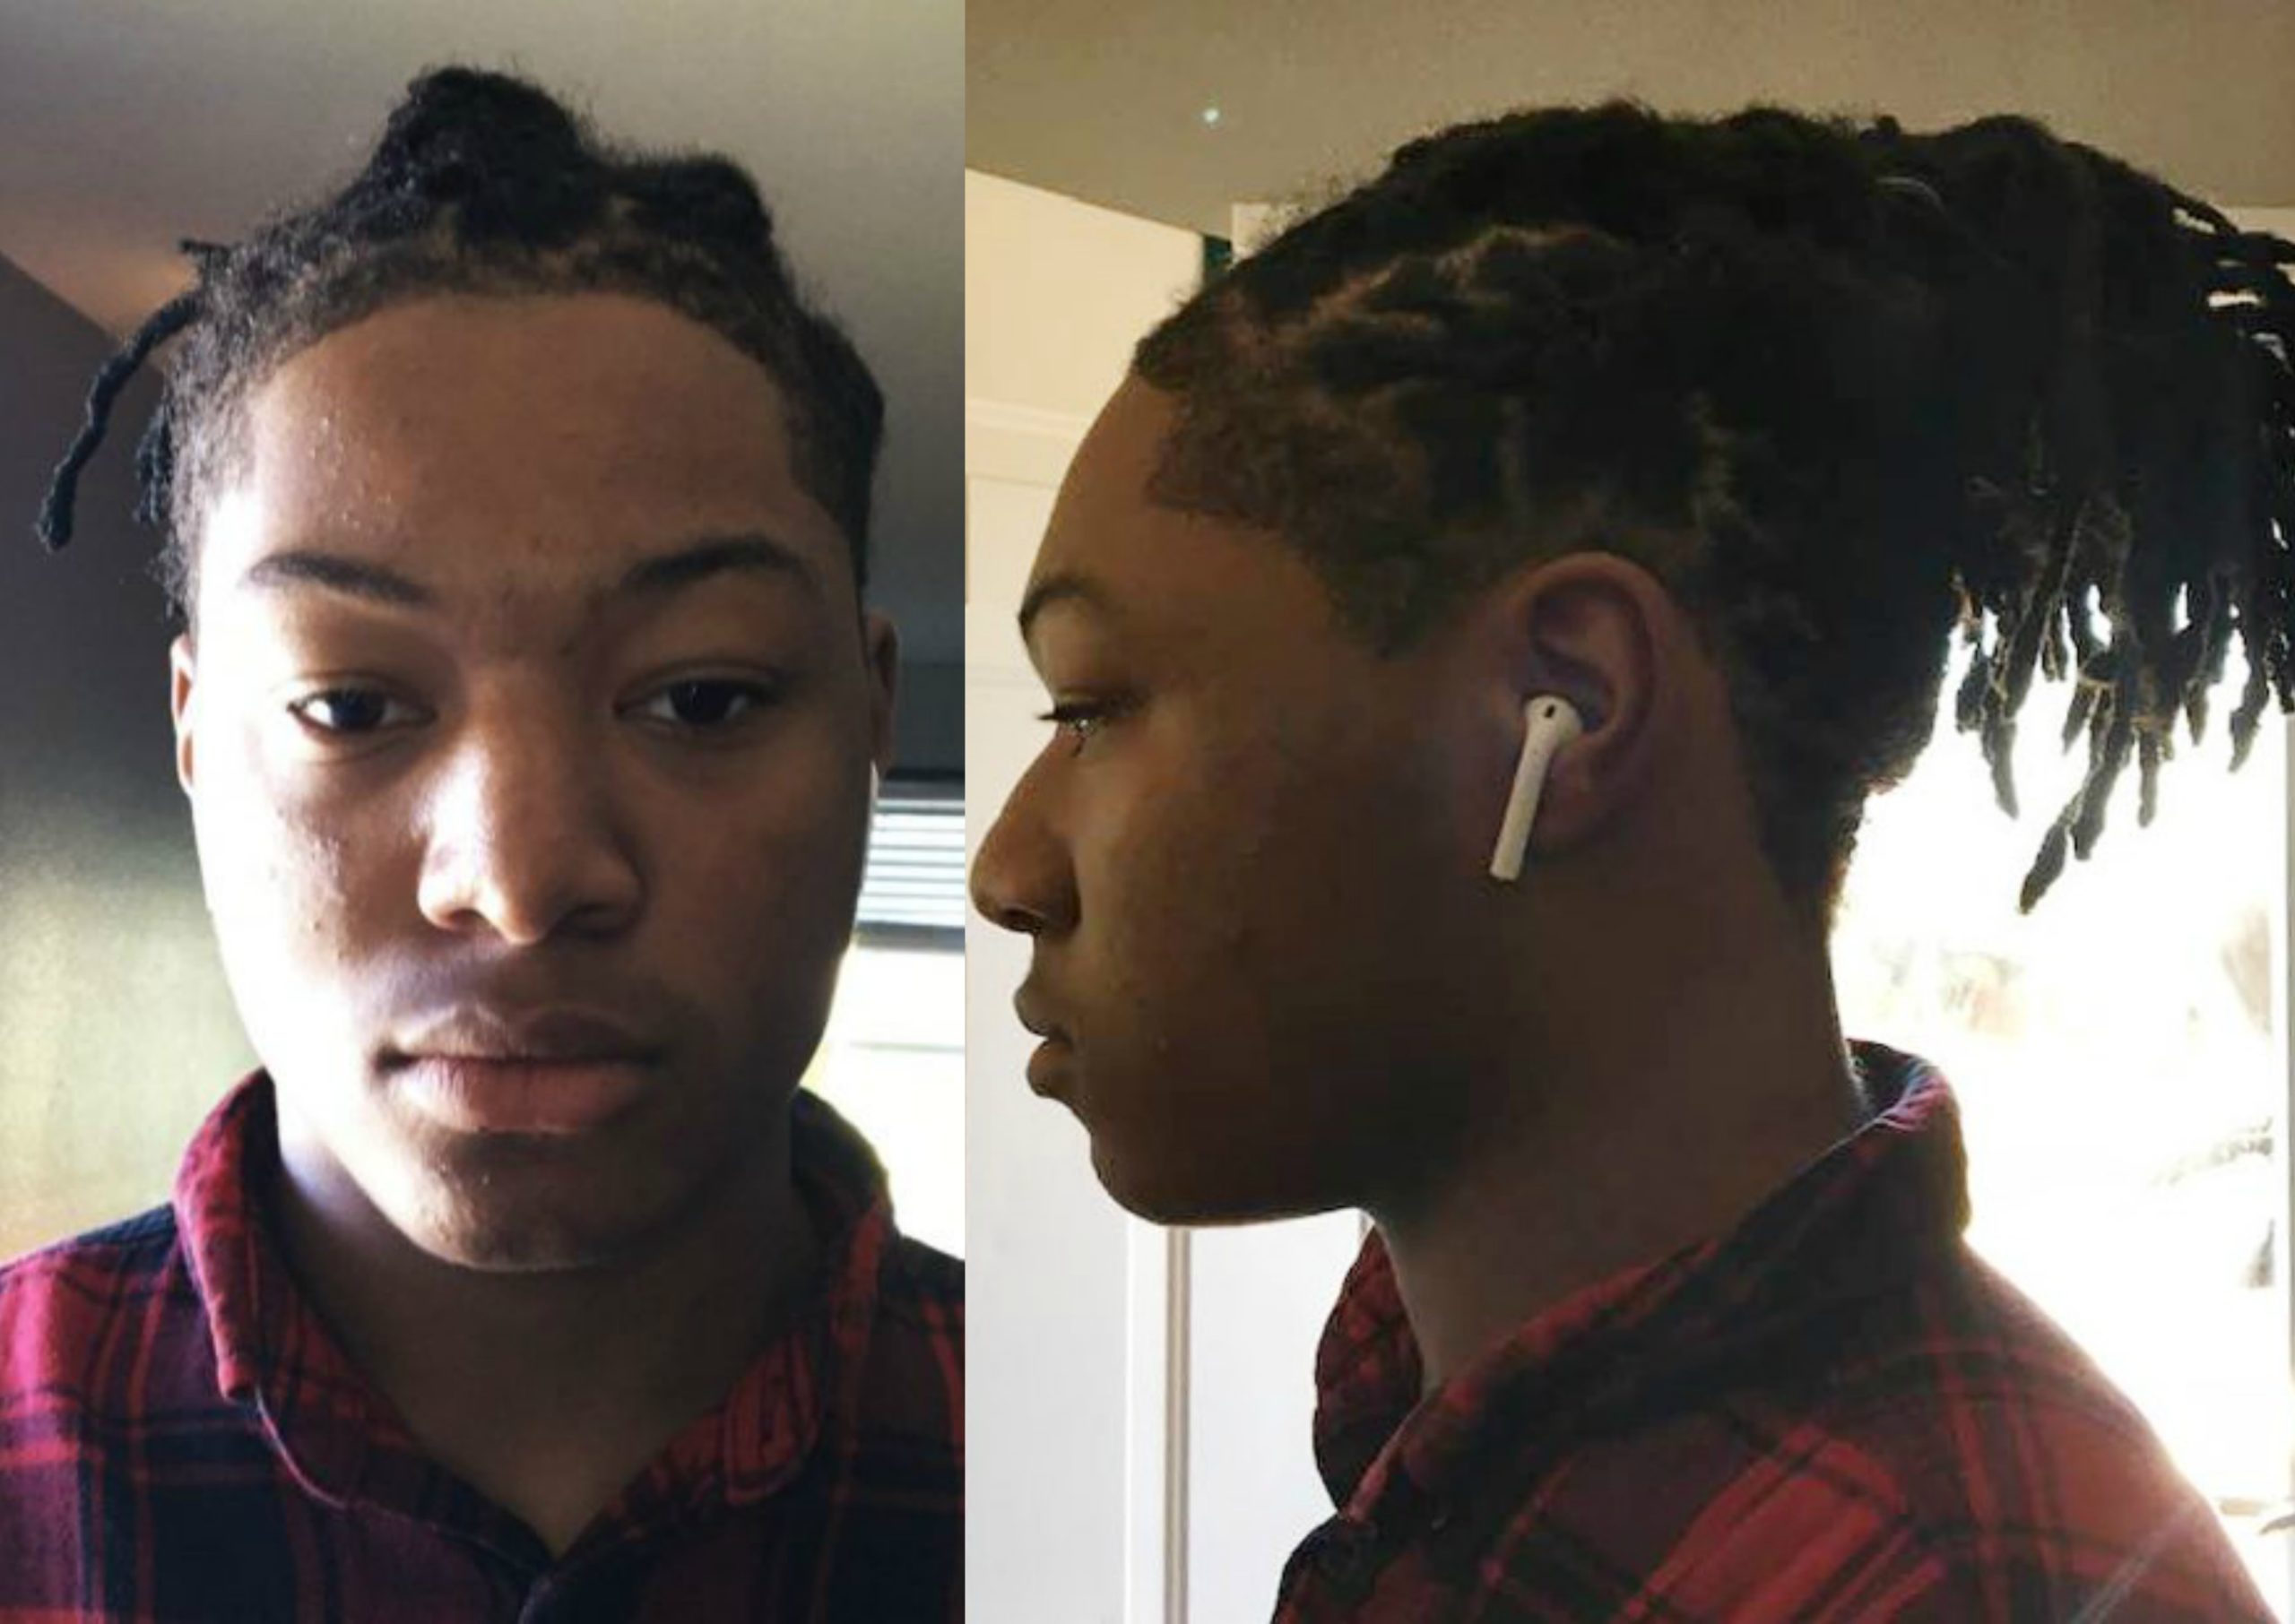 Texas Judge Rules In Favor Of Teen Ordered To Cut Dreads By School District